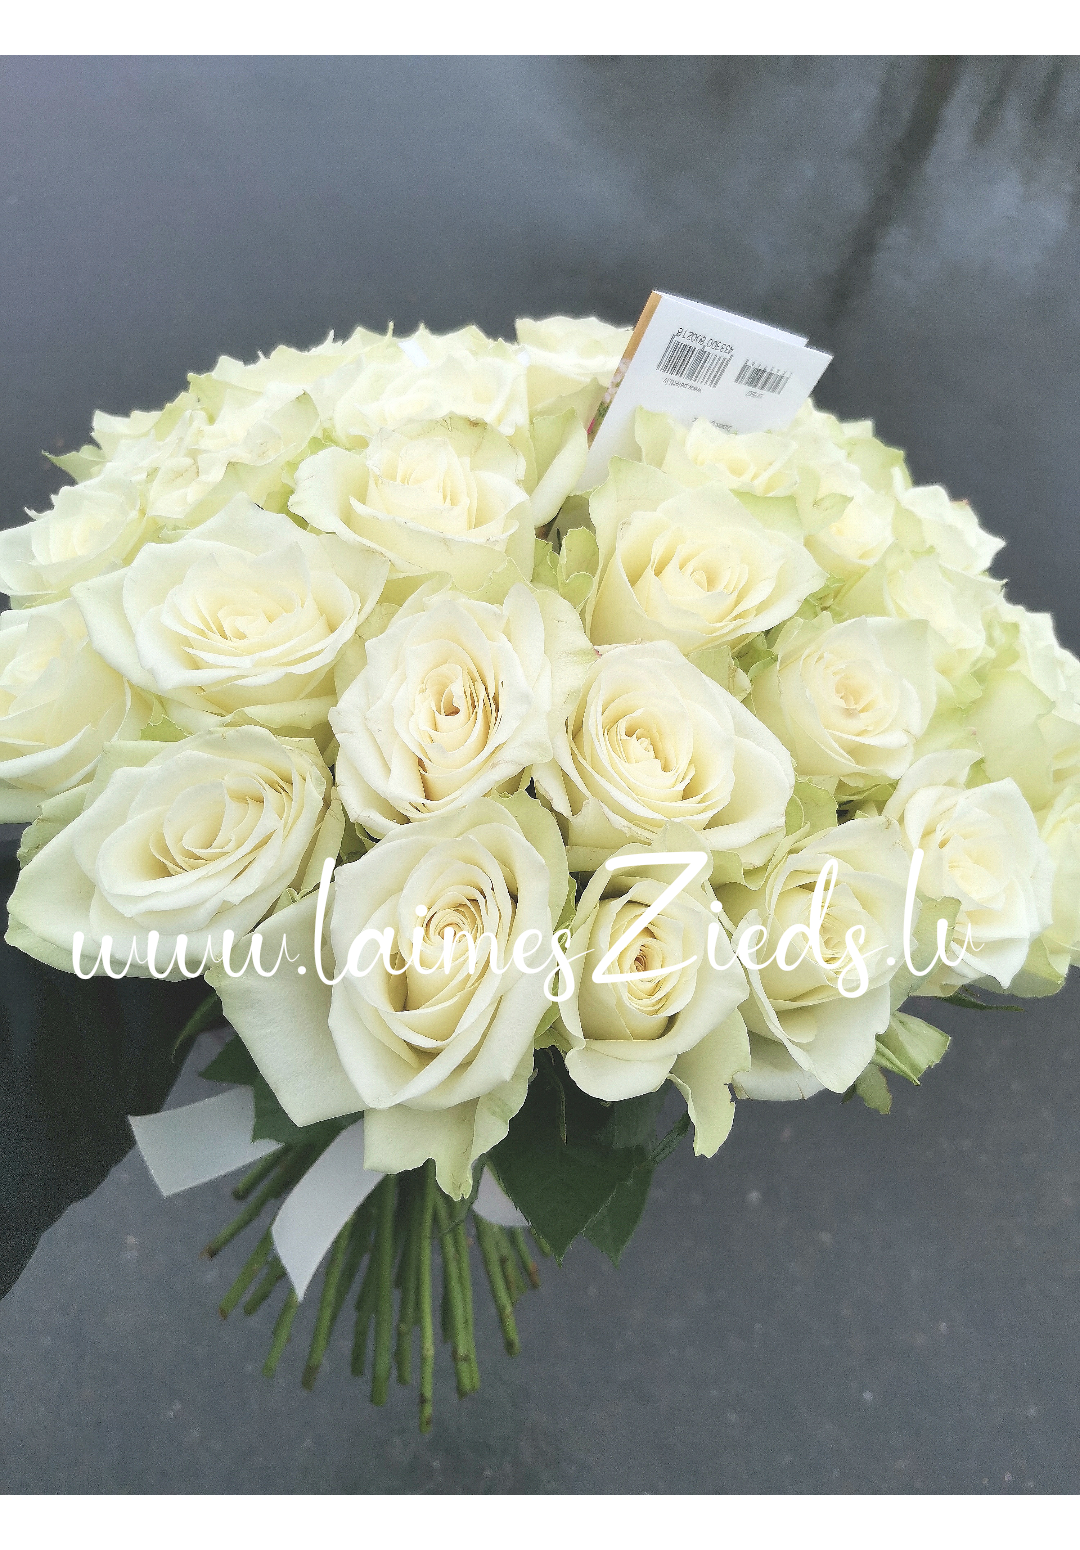 Flower delivery to Liepaja. Different colors Bush rose. Send Flowers